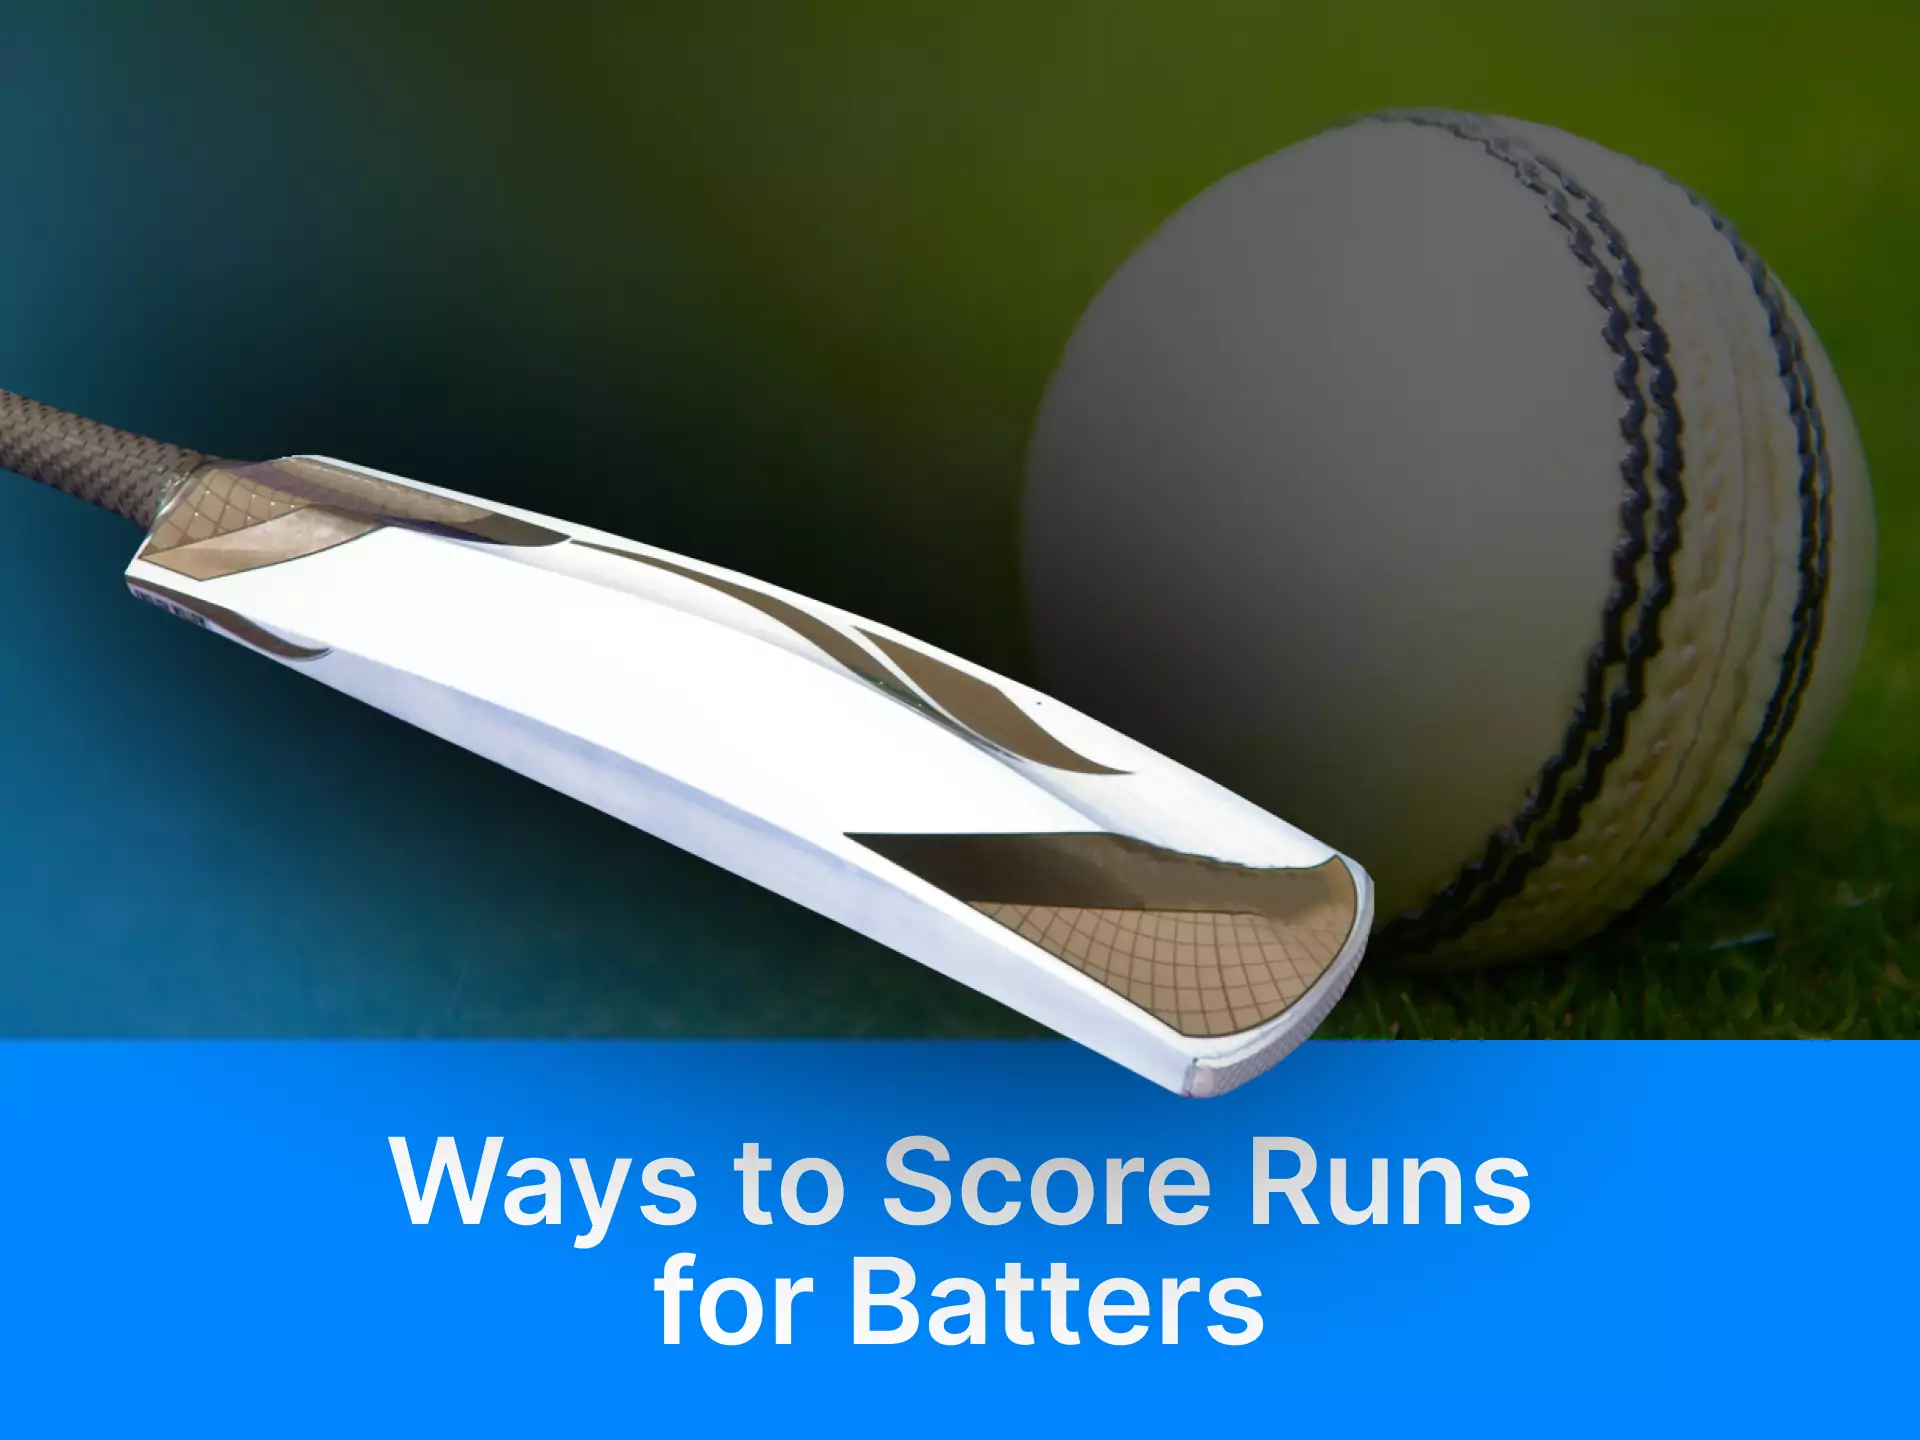 Find out what ways there are to score runs for batters.